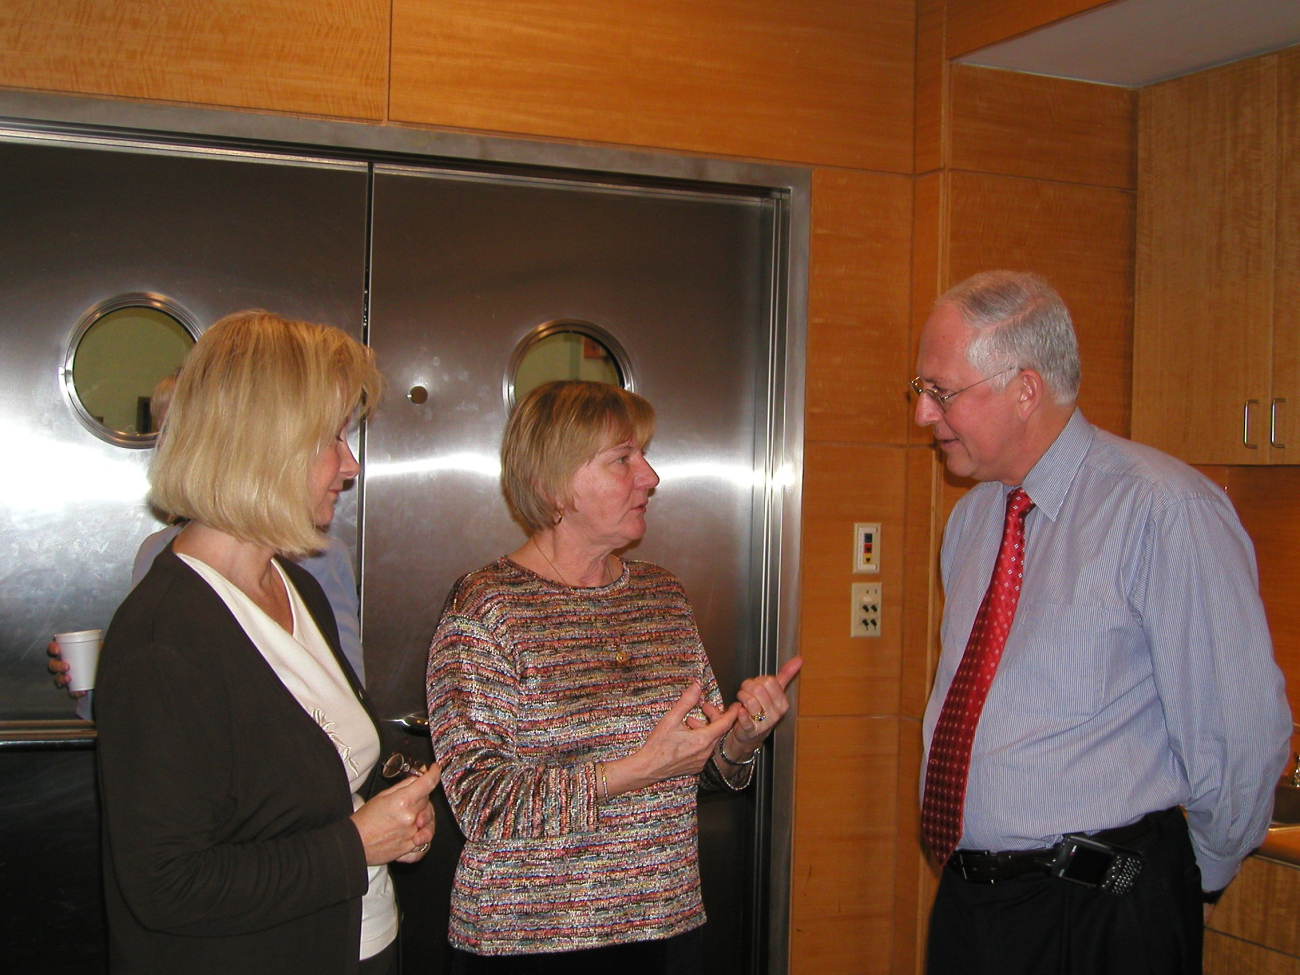 Linda Pikula, head of the NOAA Miami Regional Library, and Janice Beattie (center), Director of the NOAA Central Library, speak with Dr